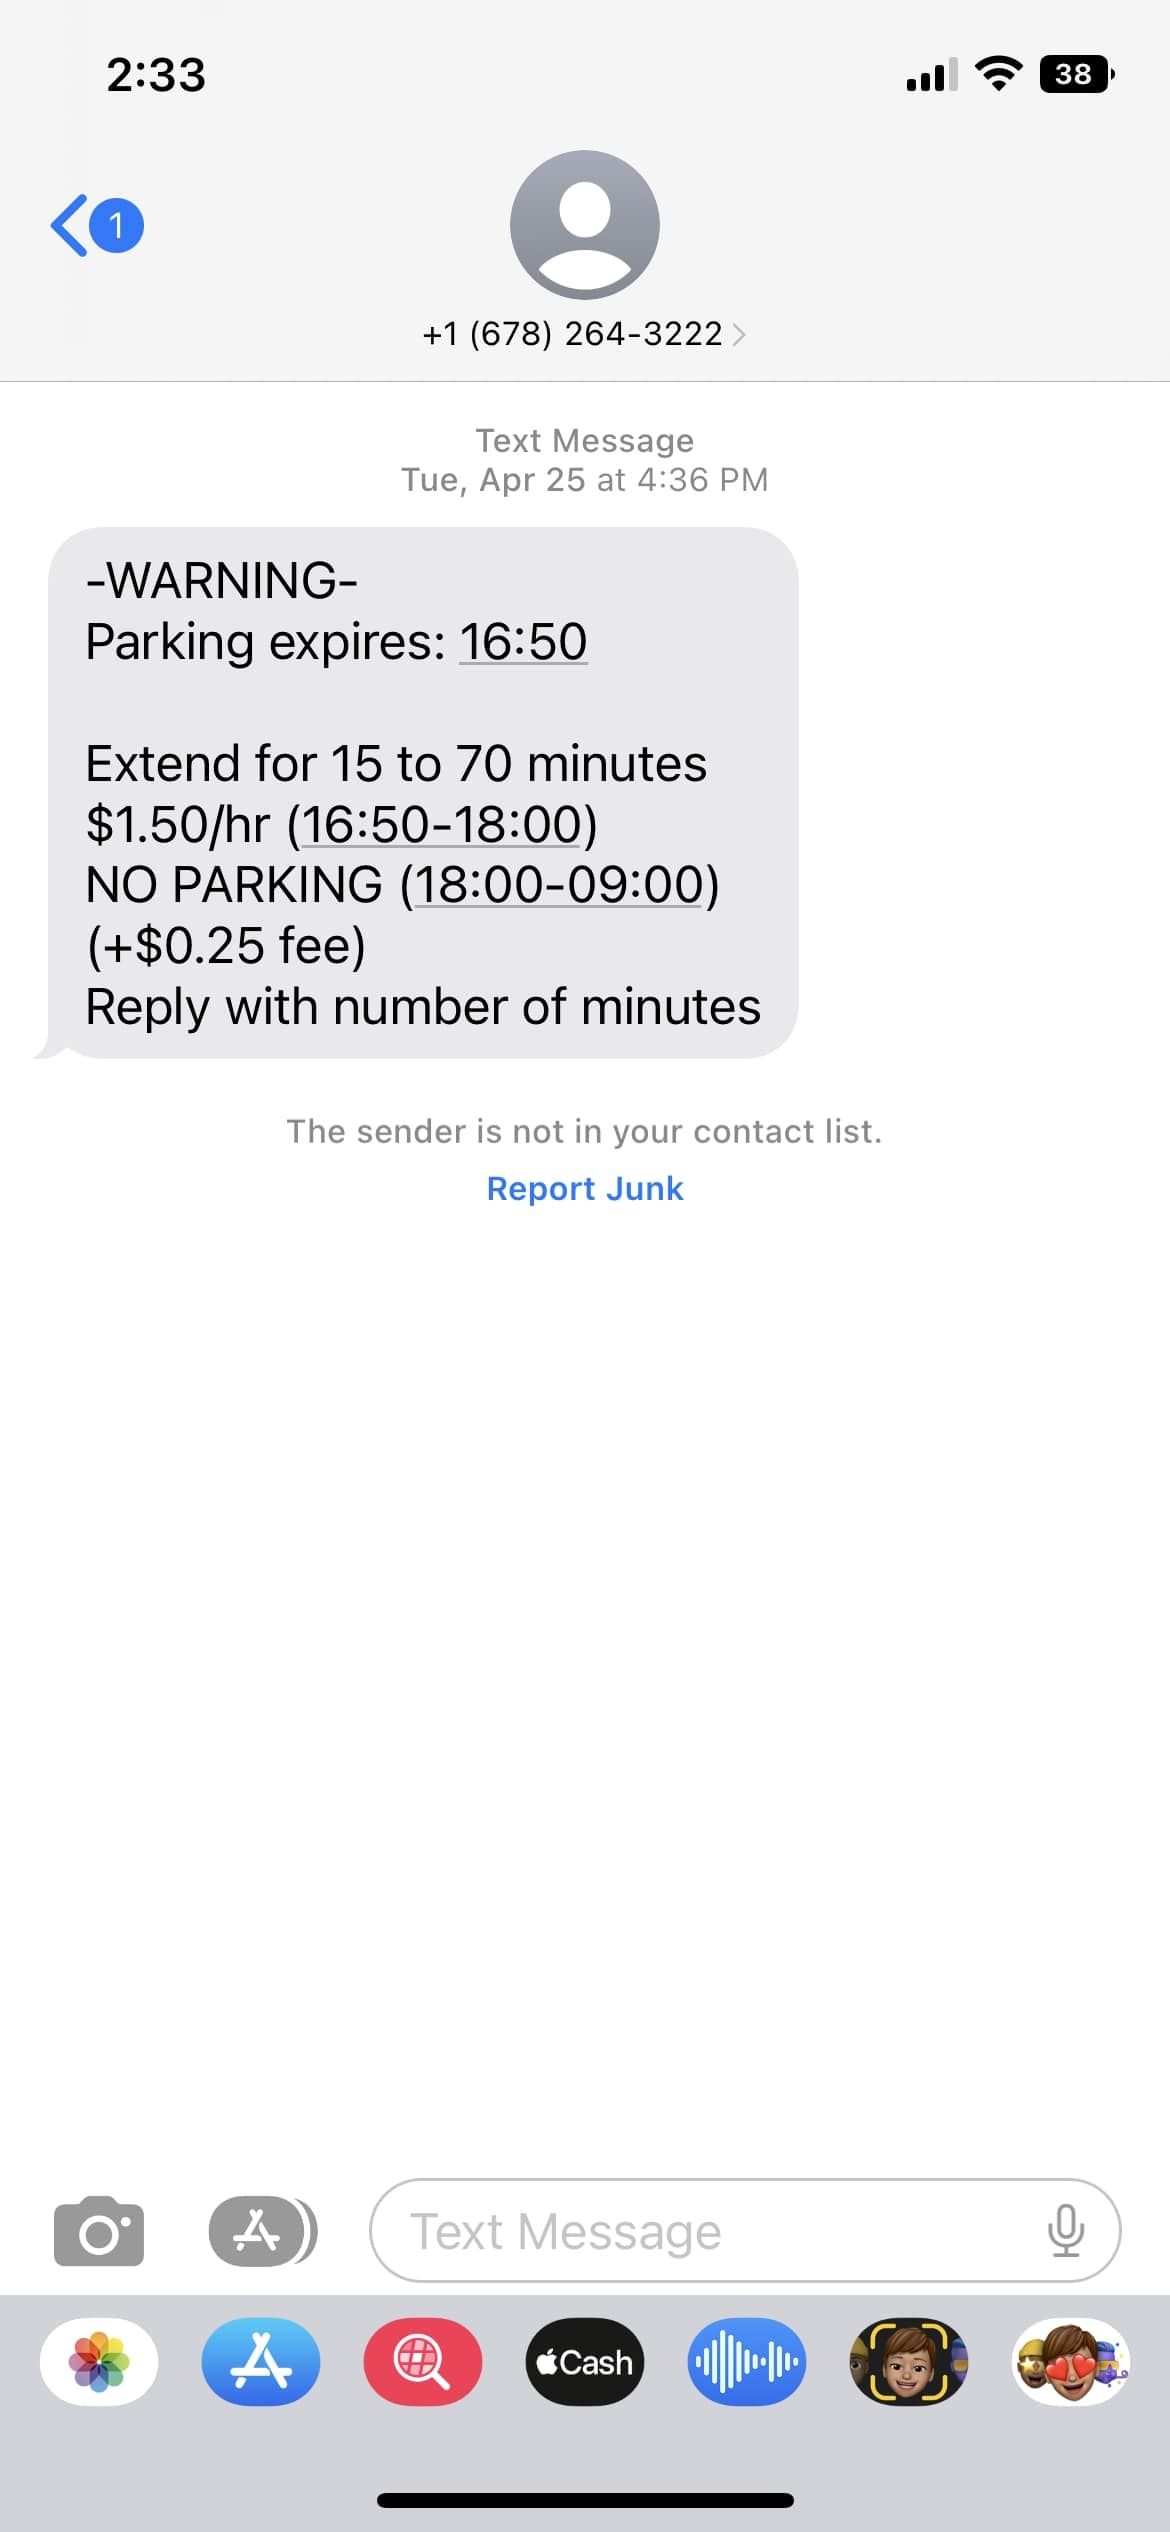 Example of Ithaca parking meter text message